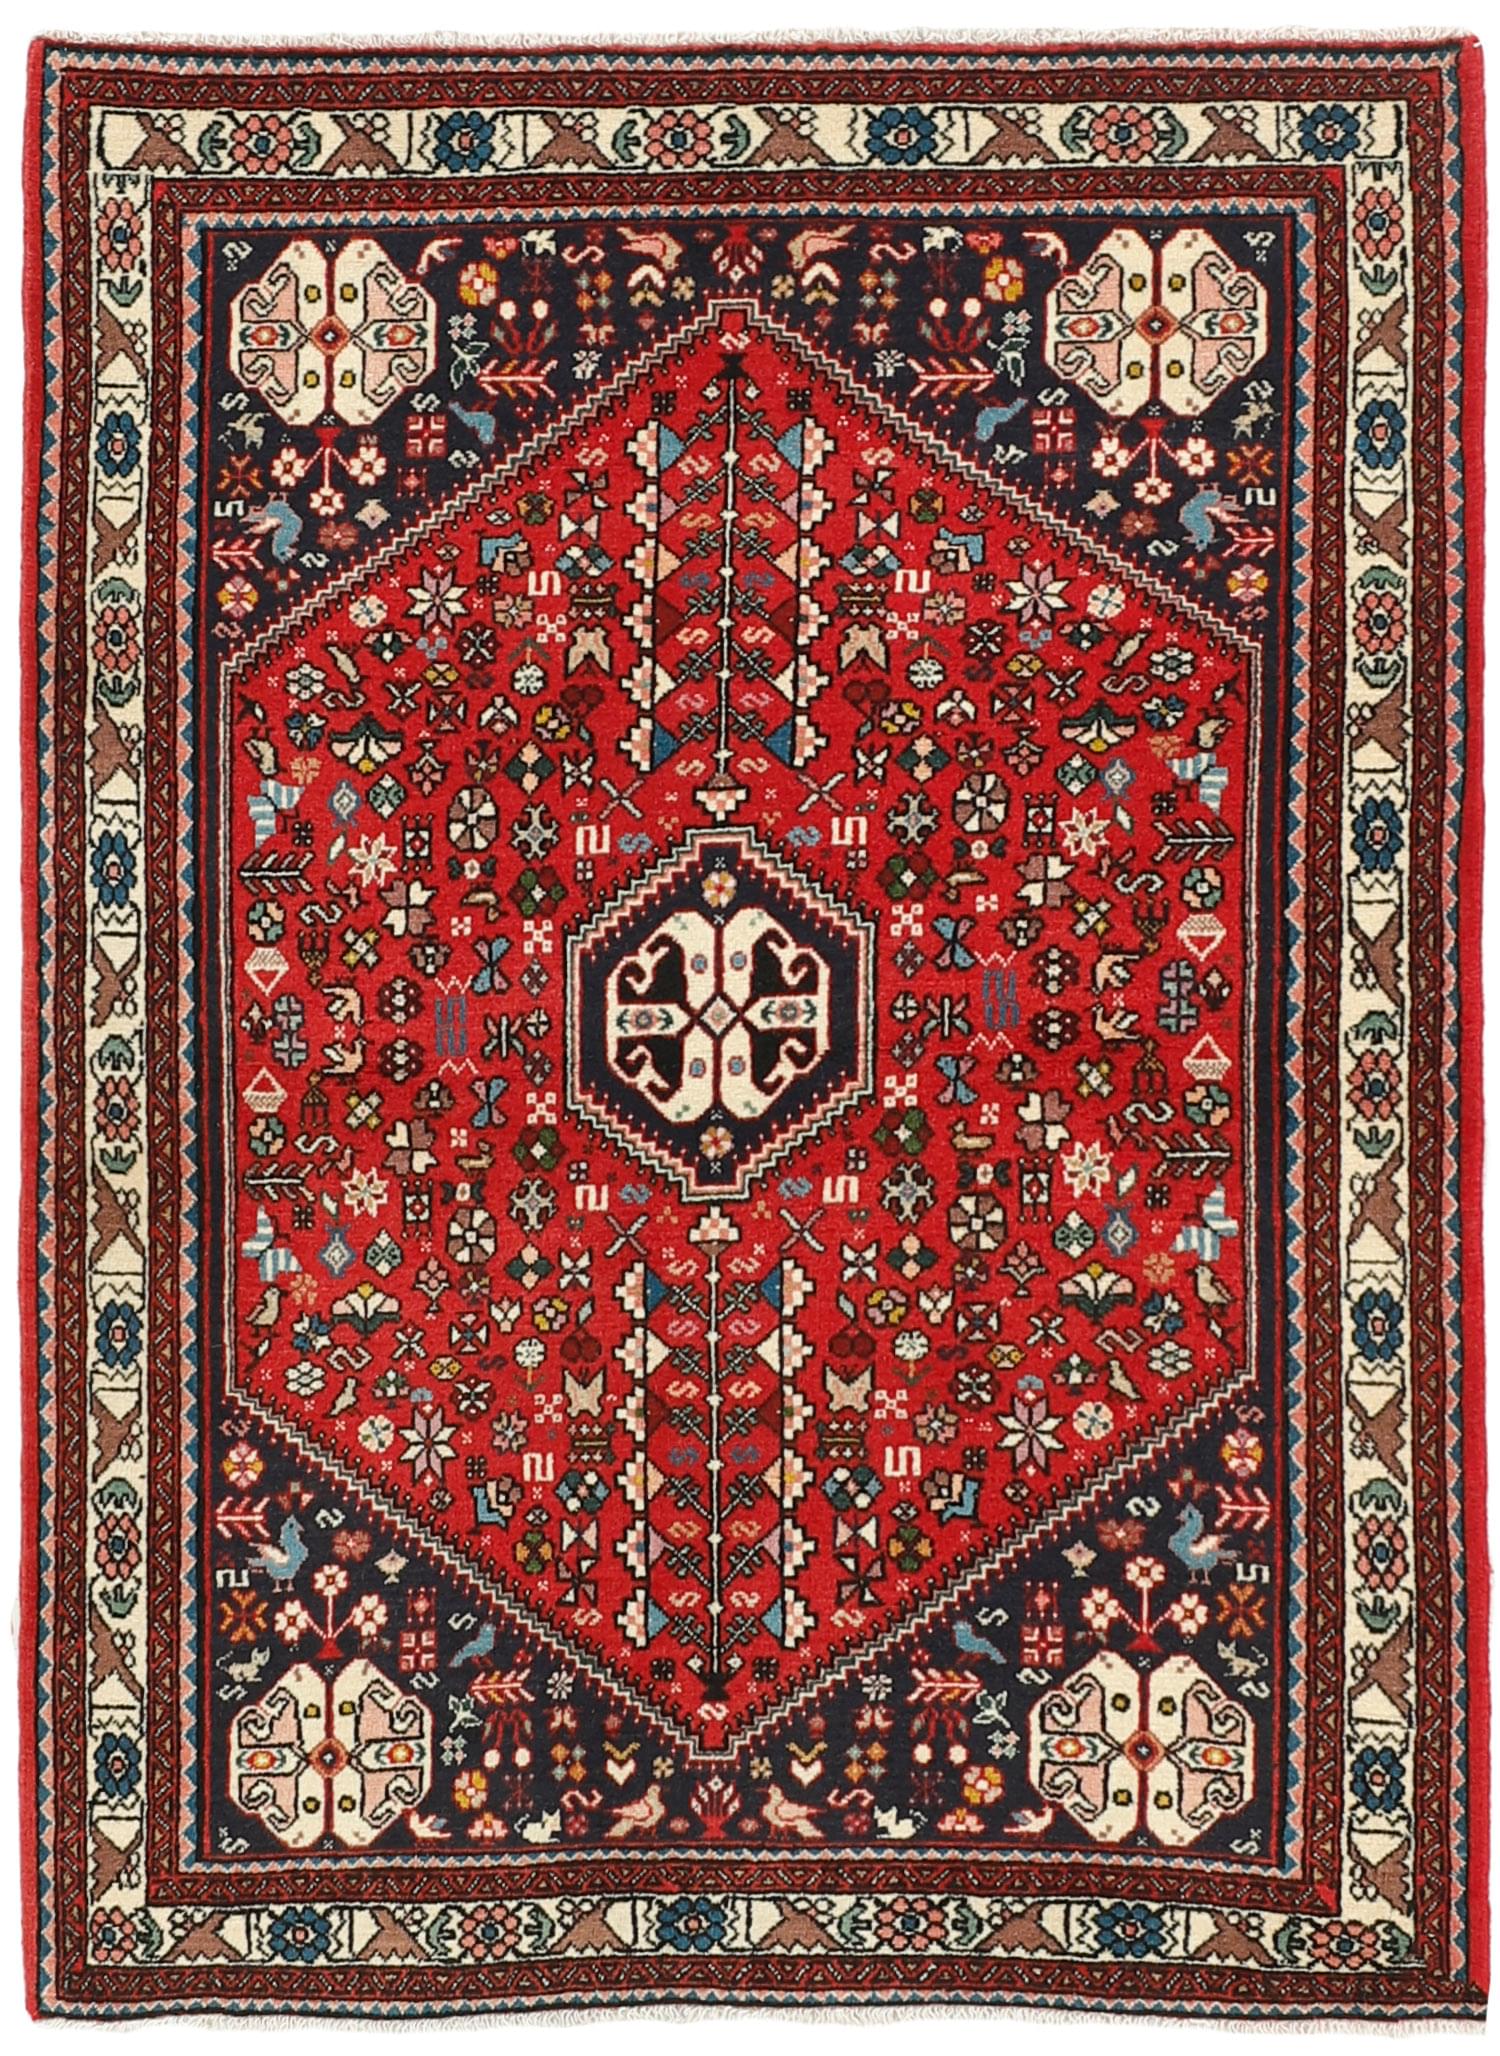 Authentic persian rug with traditional tribal geometric design in red and cream